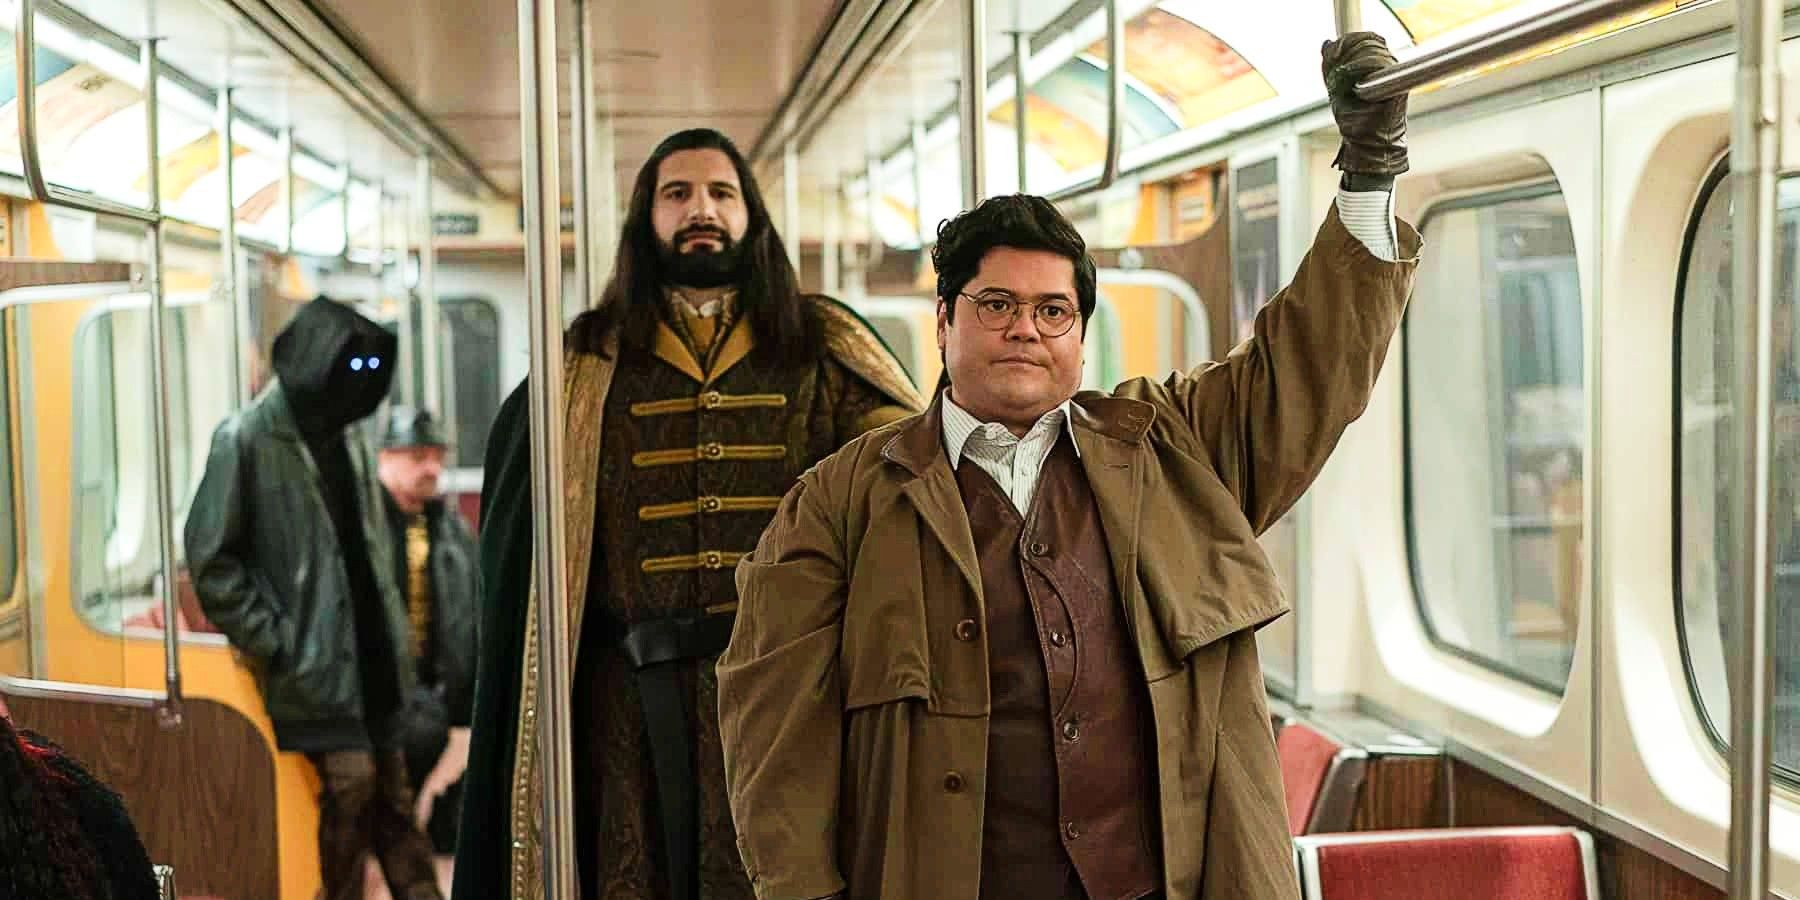 Guillermo and Nandor in What We Do In The Shadows